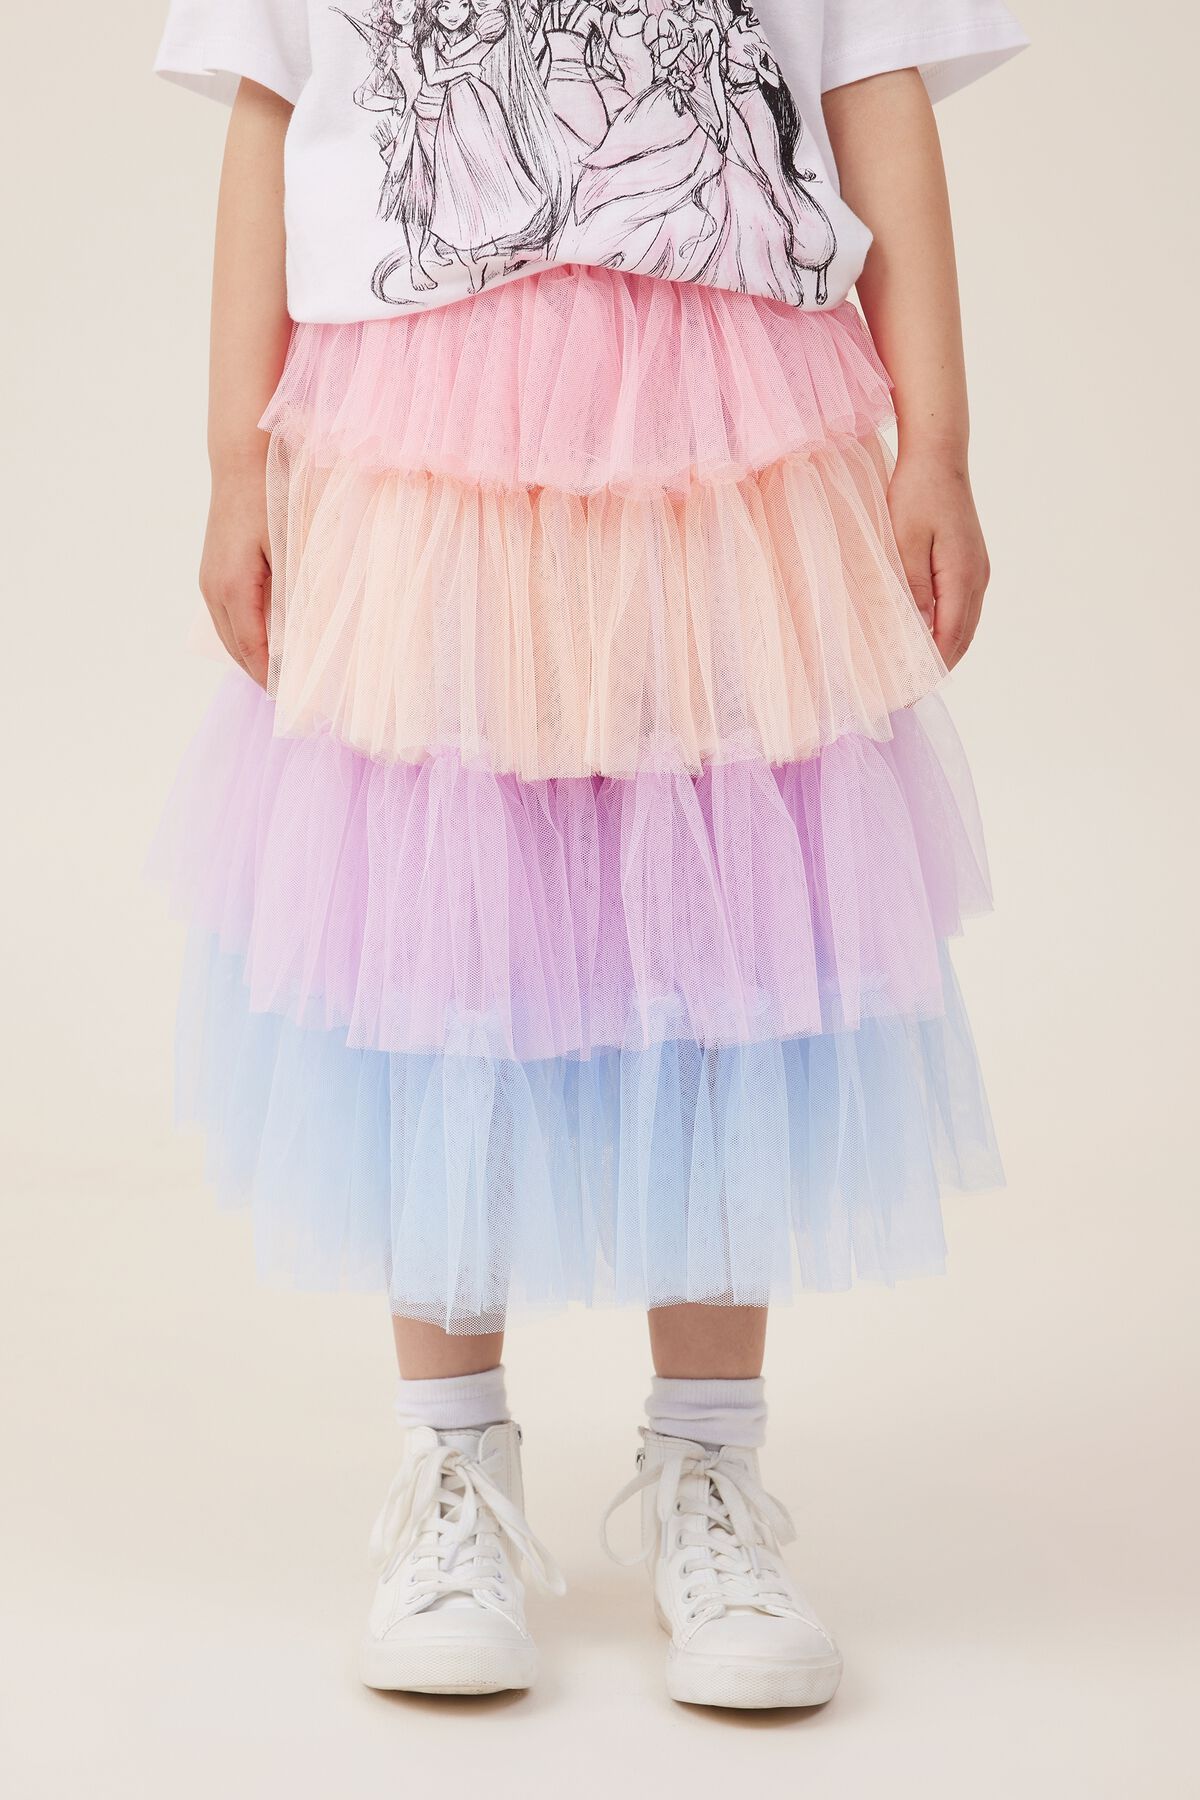 Trixiebelle Dress Up Skirt | Cotton On (US)